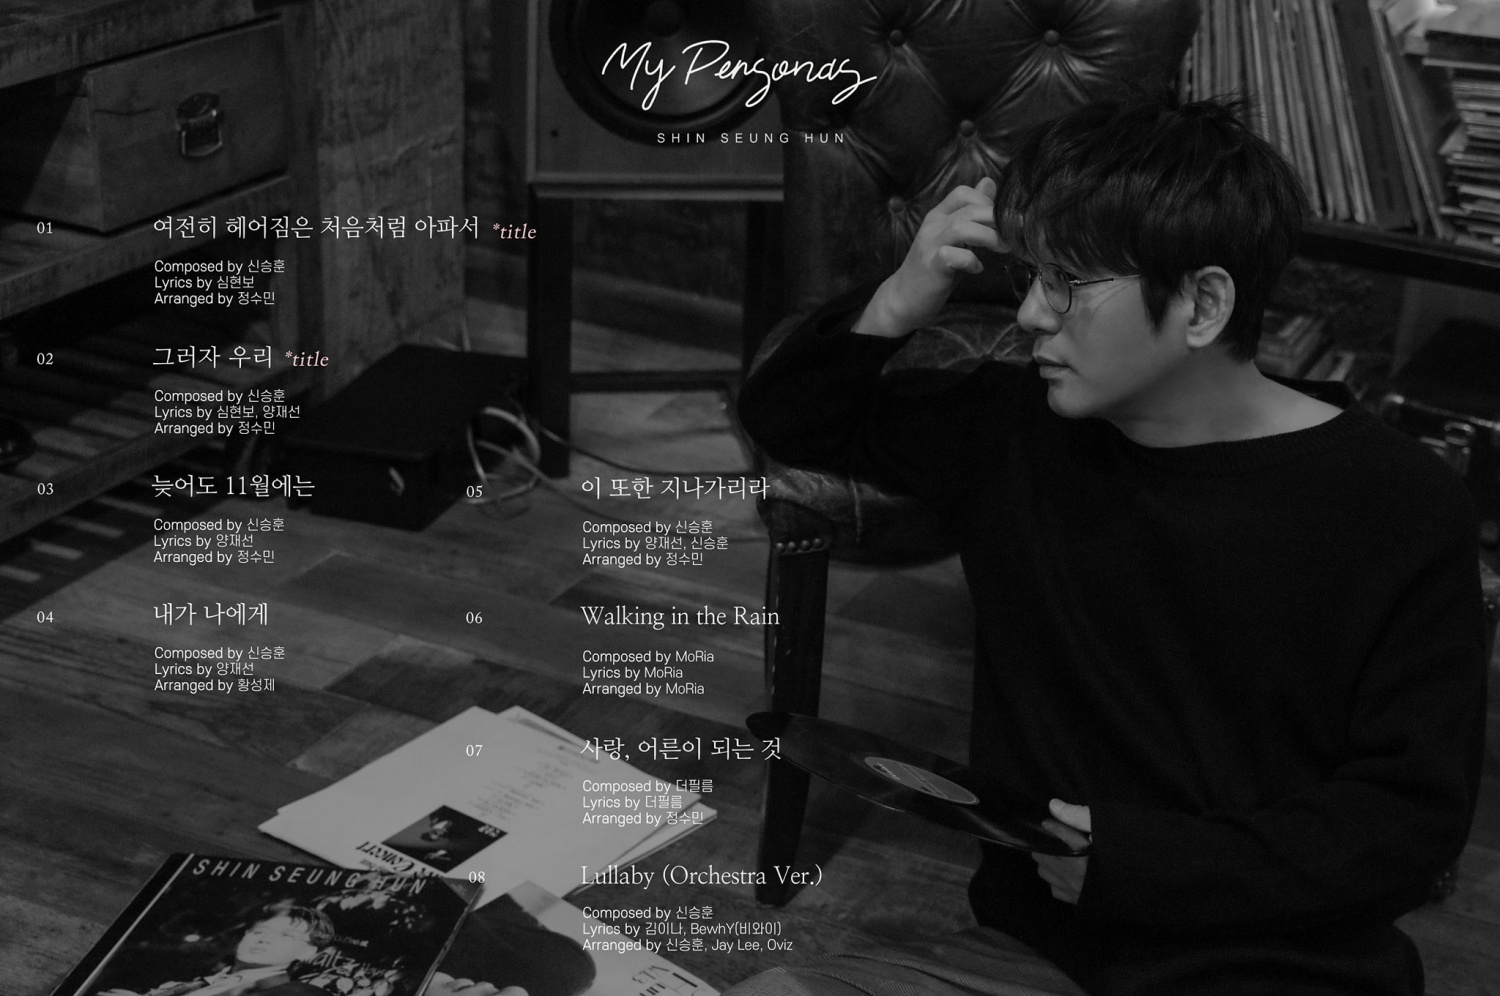 Shin Seung Hun, 30th anniversary of debut, reveals track list of 'My Personas'